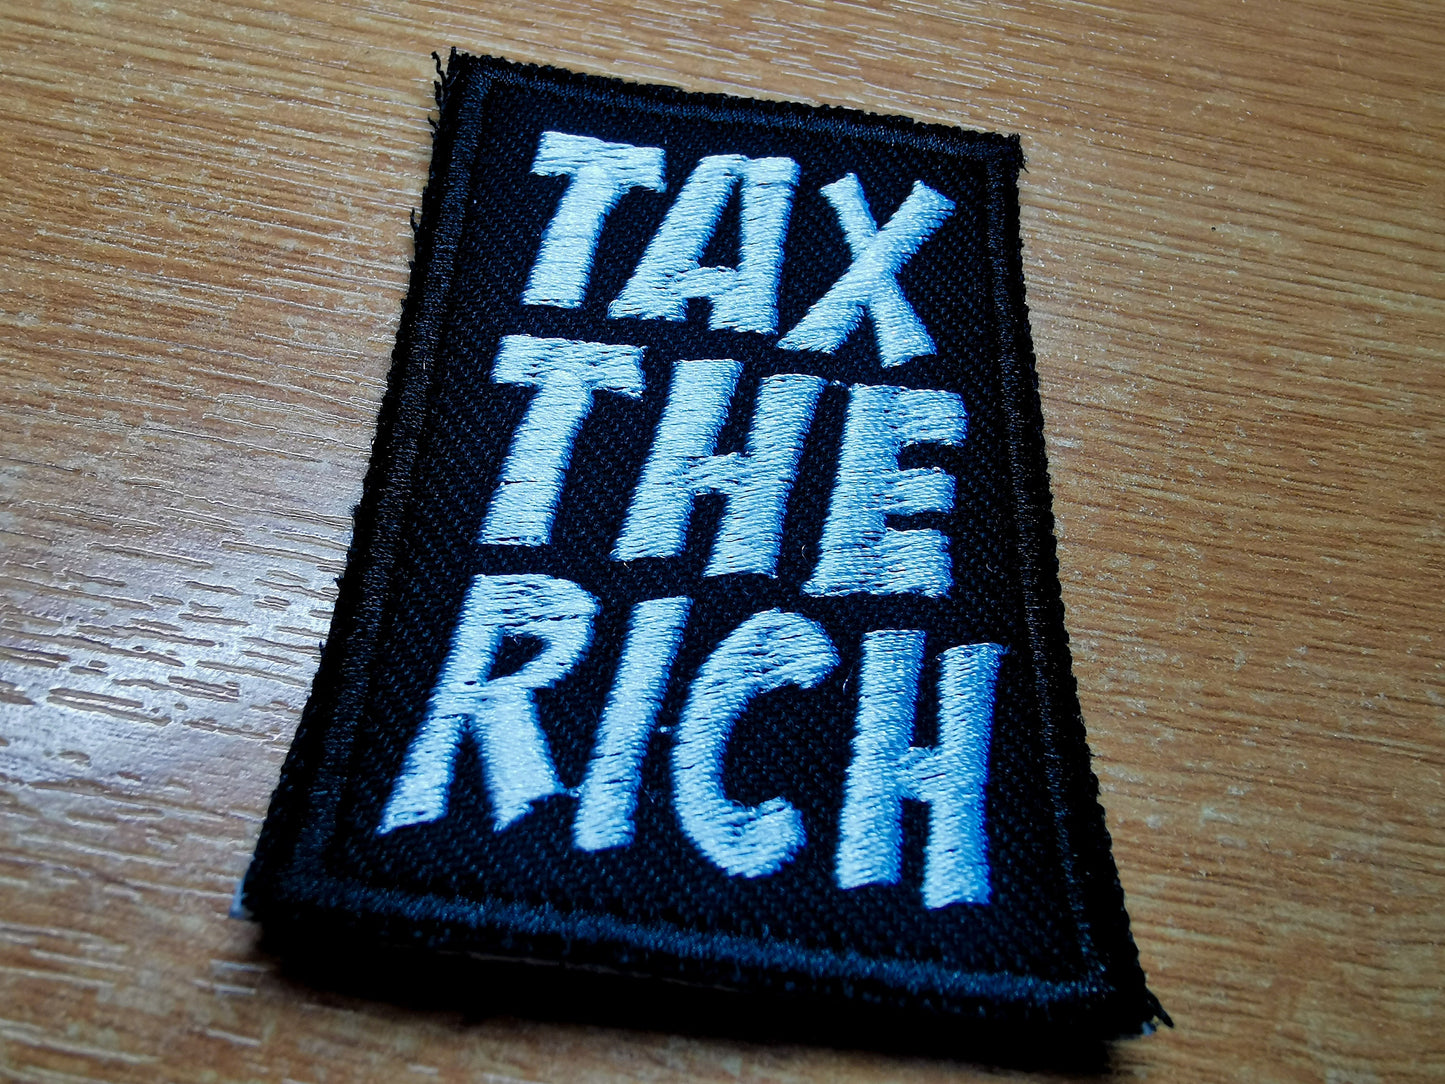 Tax The Rich Embroidered Iron On Patch Politics Punk Billionaire Capitalism